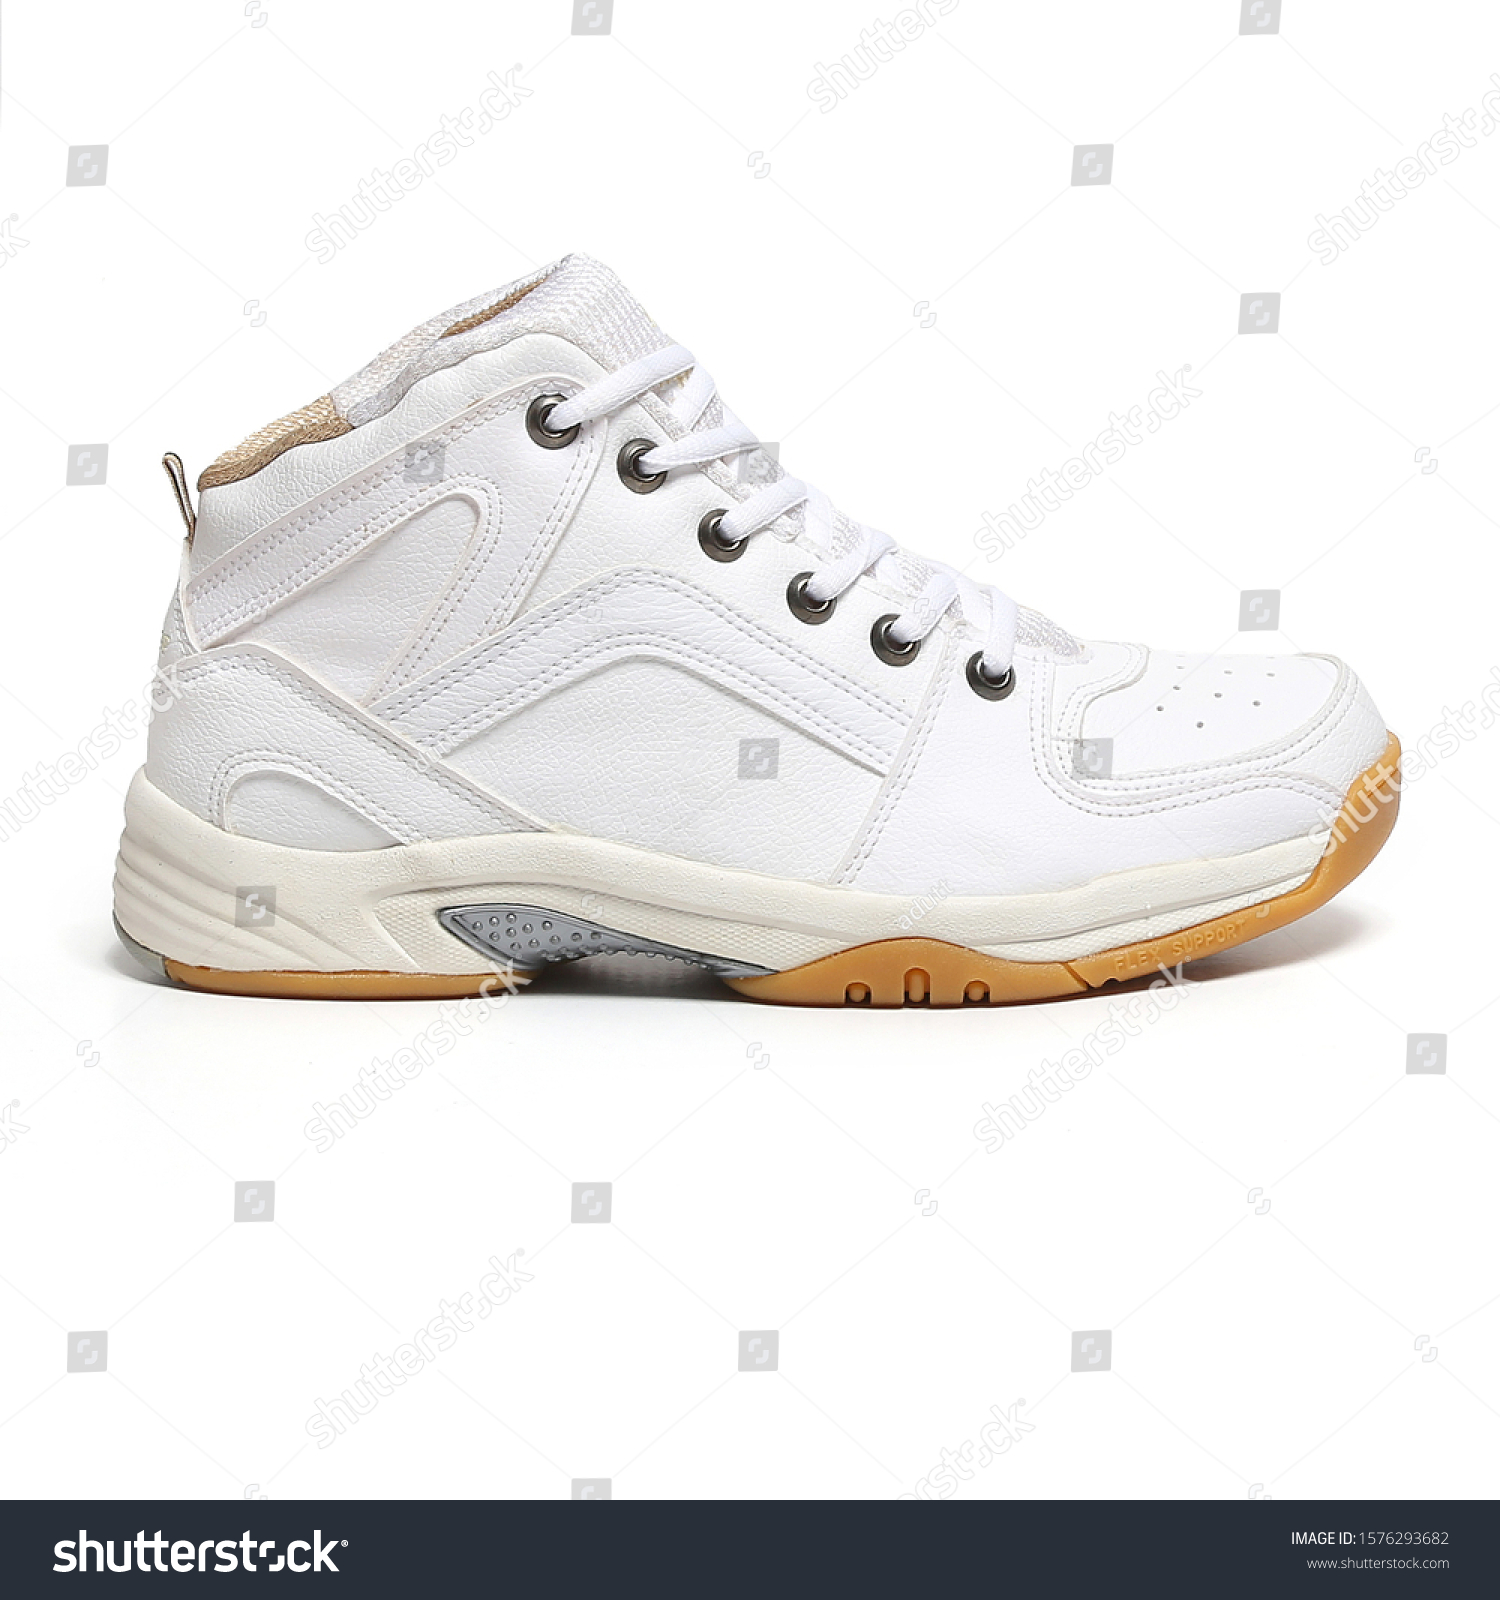 high ankle sports shoes